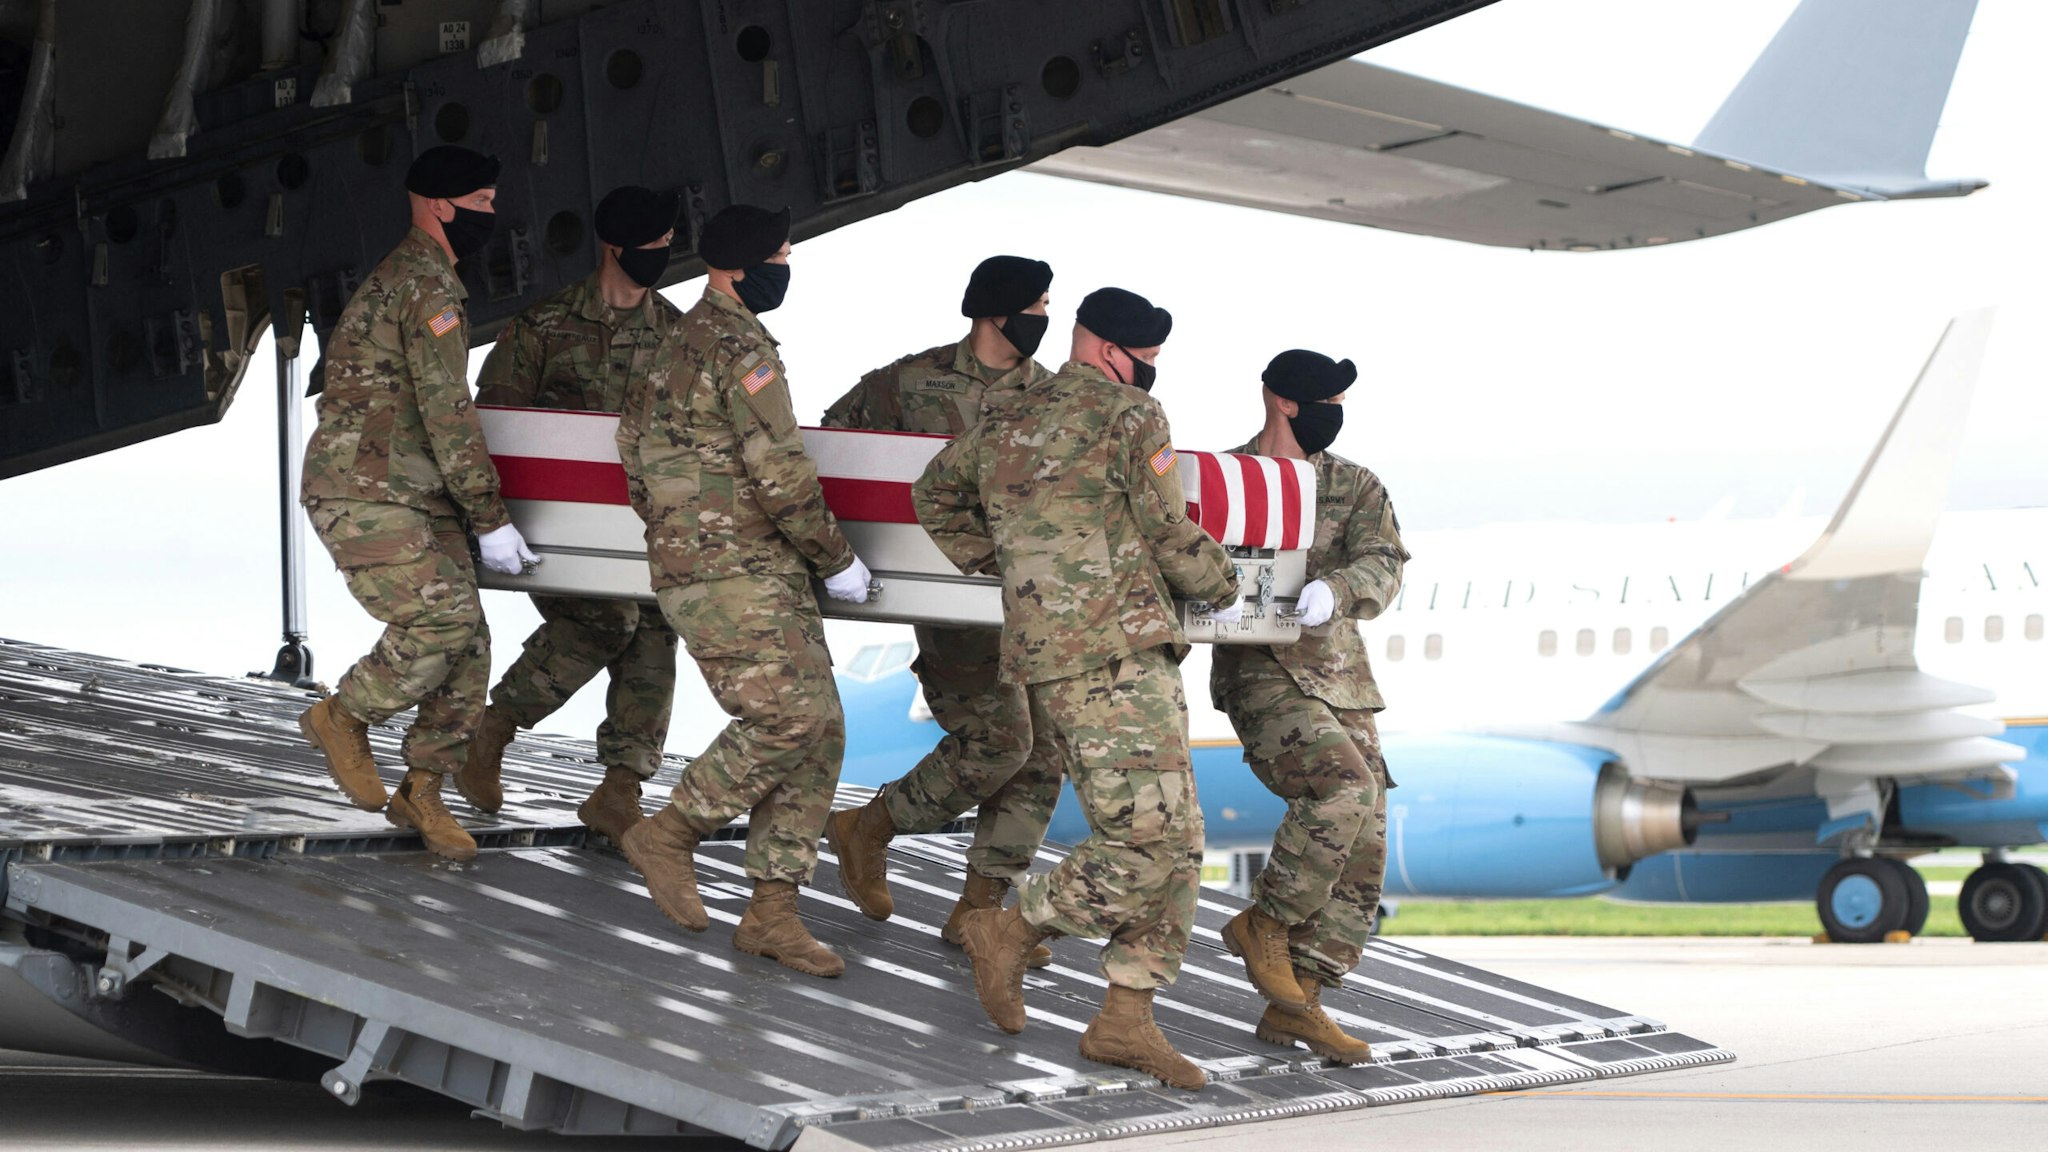 A transfer case with the remains of Army Staff Sgt. Ryan C. Knauss, 23, of Corryton, Tennessee, are carried off of a military aircraft as US President Joe Biden attends the dignified transfer at Dover Air Force Base in Dover, Delaware, August, 29, 2021, one of the 13 members of the US military killed in Afghanistan last week. - President Joe Biden prepared Sunday at a US military base to receive the remains of the 13 American service members killed in an attack in Kabul, a solemn ritual that comes amid fierce criticism of his handling of the Afghanistan crisis. Biden and his wife, Jill, both wearing black and with black face masks, first met far from the cameras with relatives of the dead in a special family center at Dover Air Force Base in Delaware.The base, on the US East Coast about two hours from Washington, is synonymous with the painful return of service members who have fallen in combat.